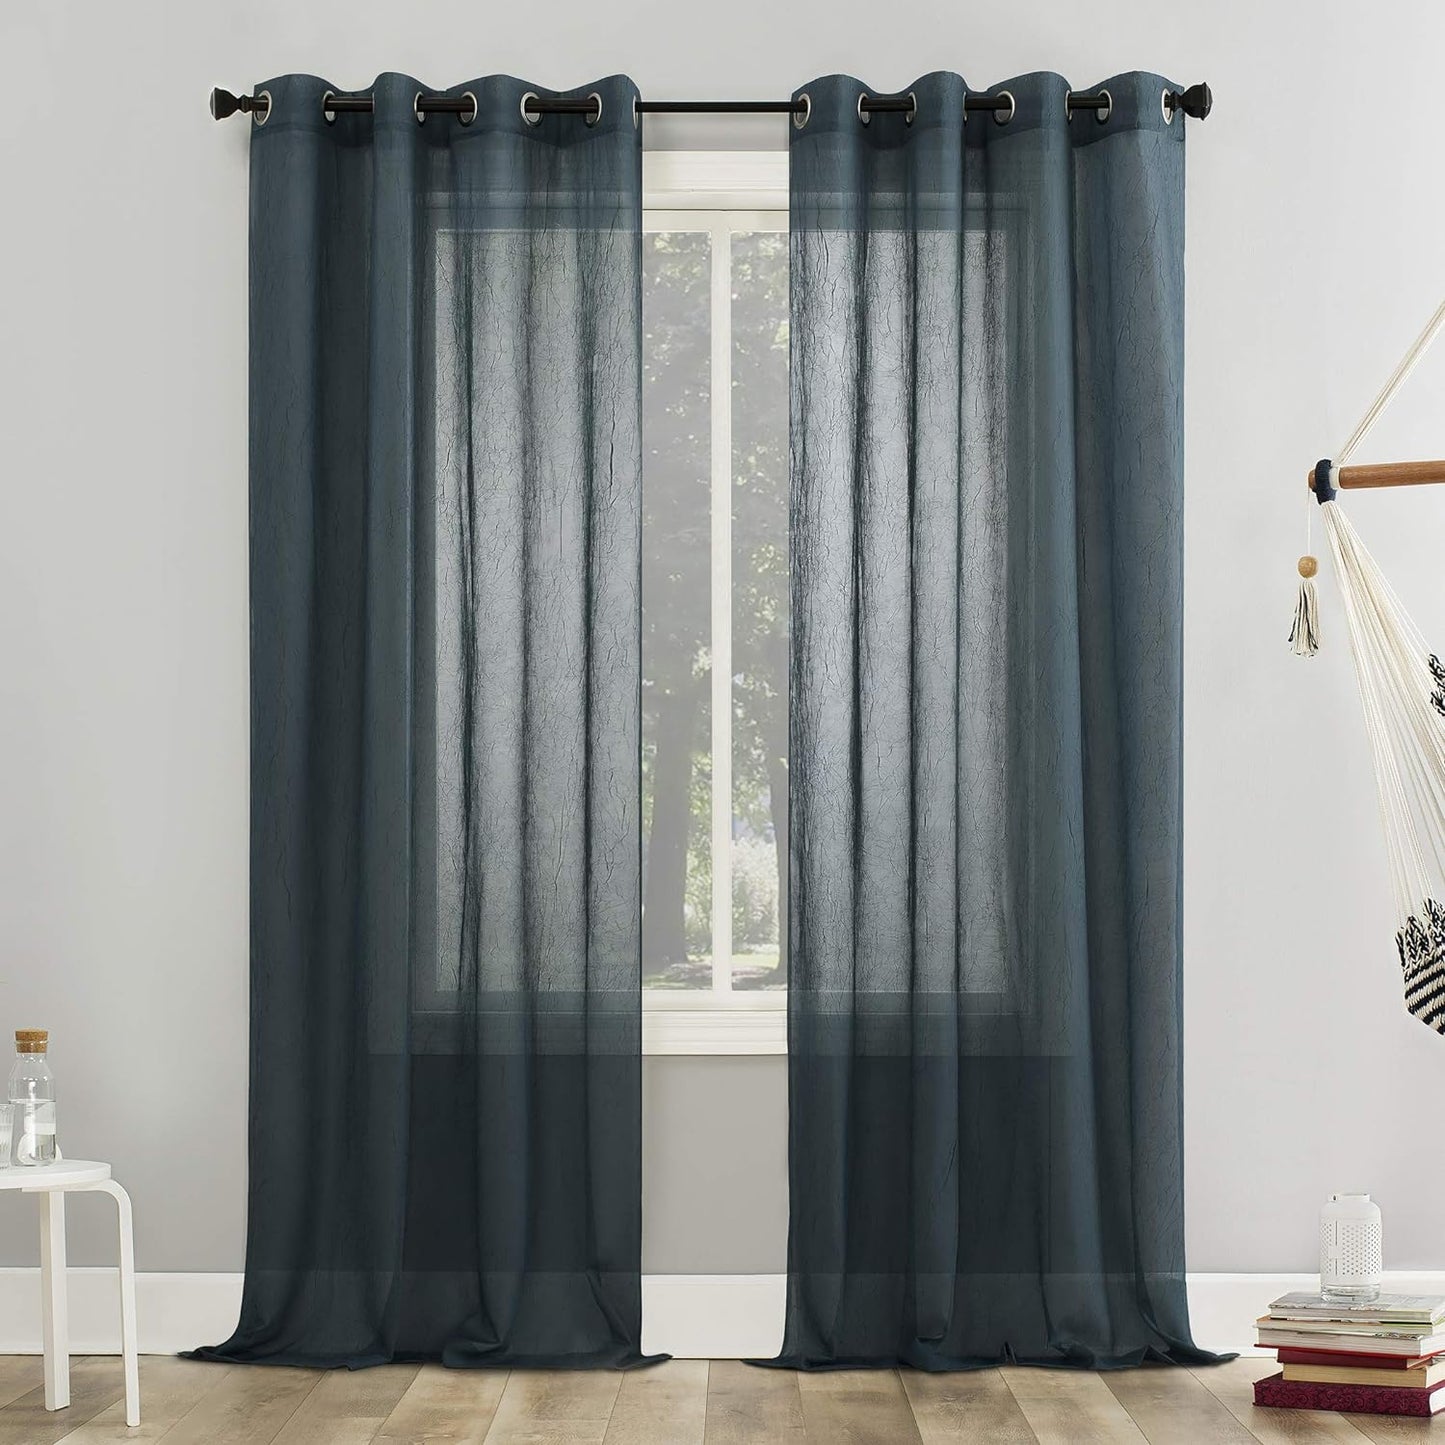 No. 918 Erica Crushed Sheer Voile Grommet Curtain Panel 84.00" X 51.00"  No. 918 Teal 51" X 63" Panel 